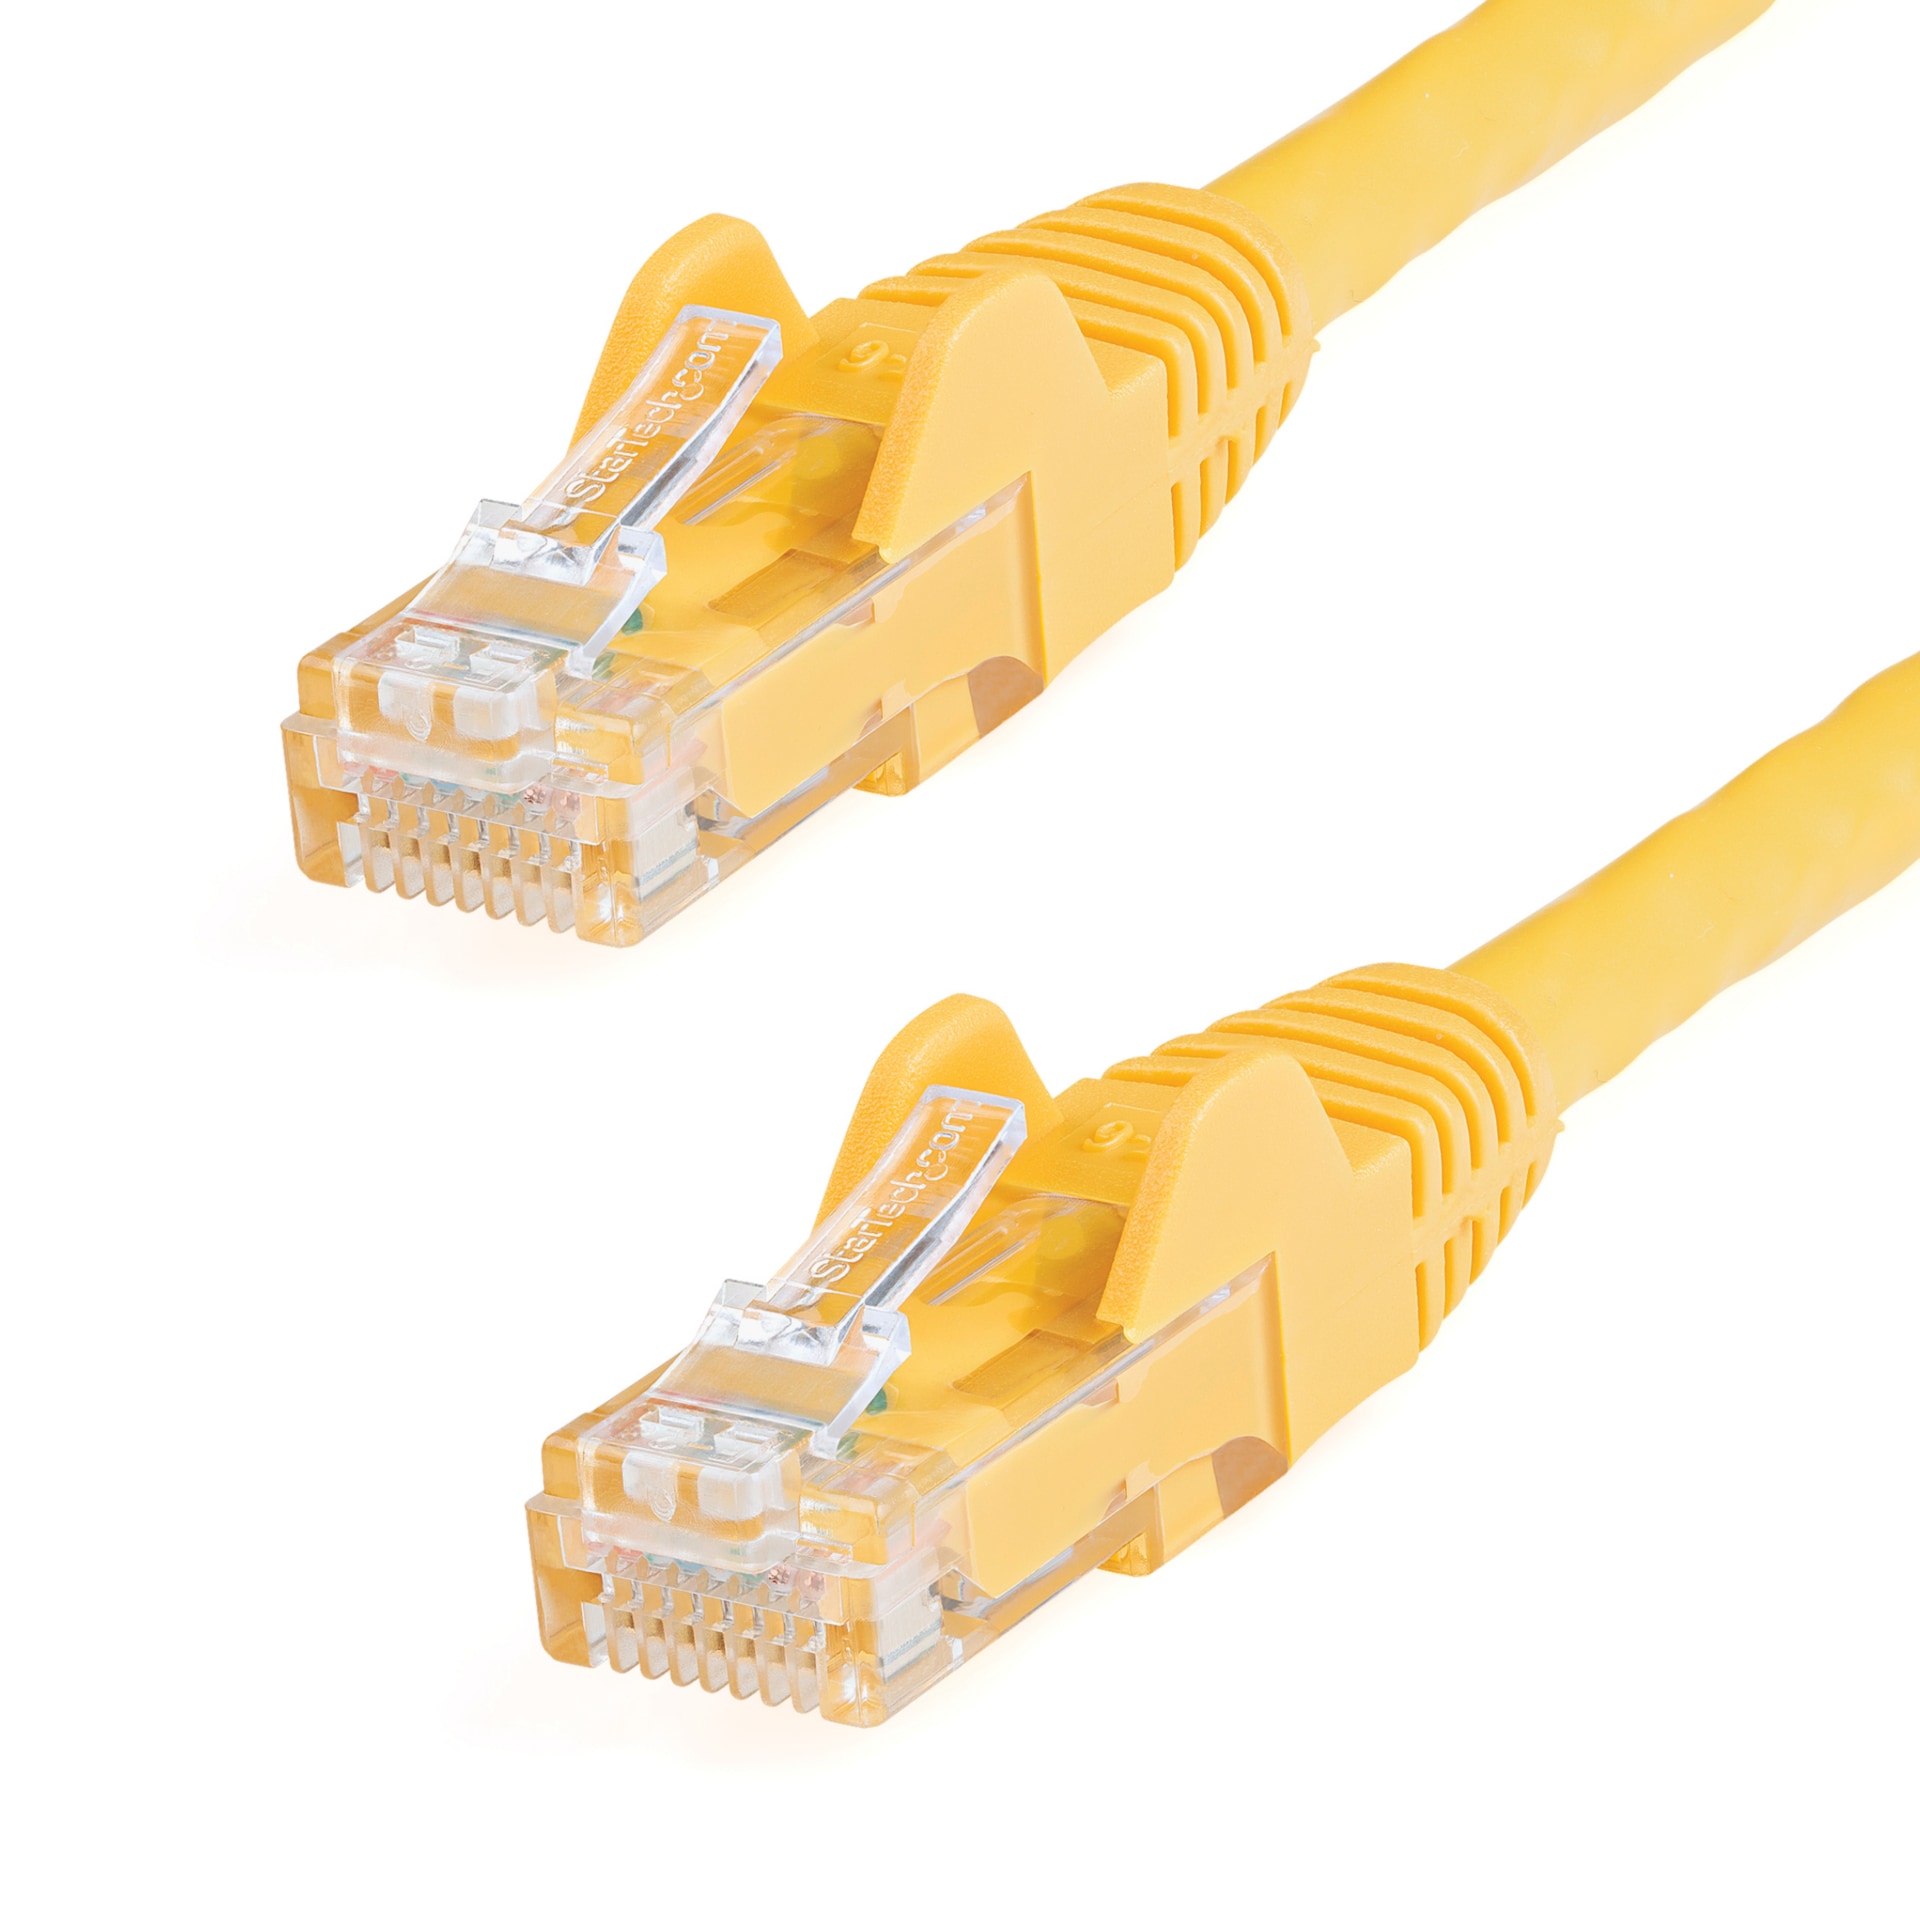 StarTech.com CAT6 Ethernet Cable 50' Yellow 650MHz PoE Snagless Patch Cord